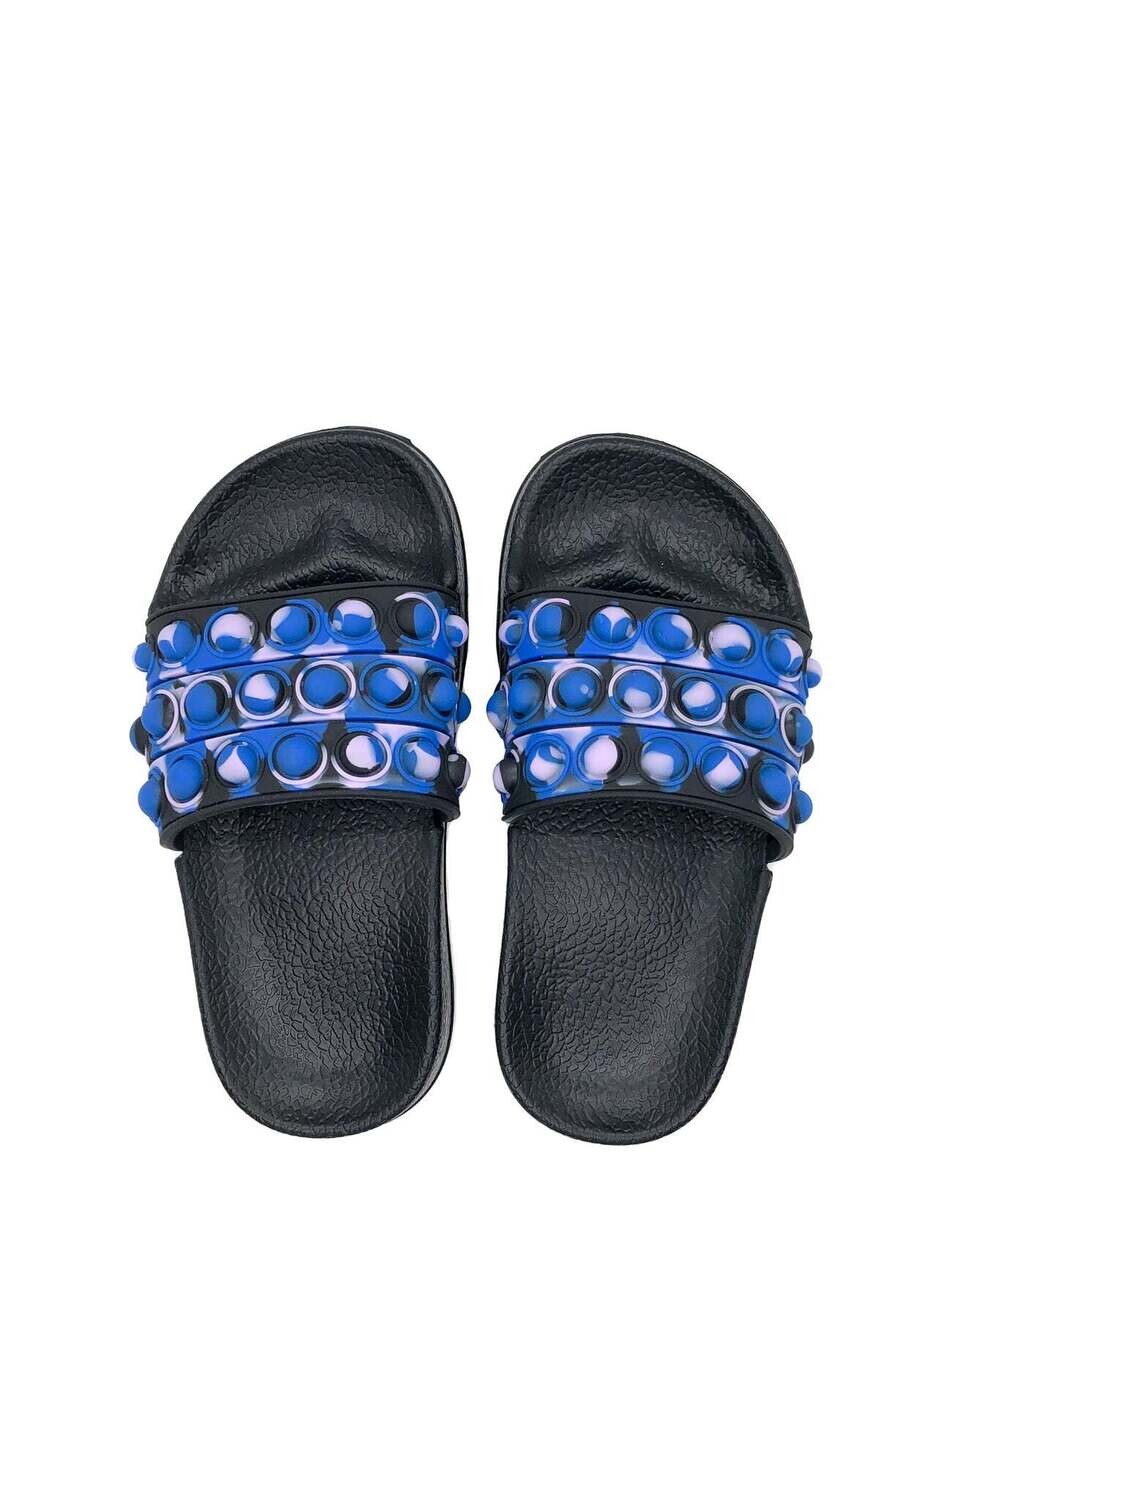 In and Out Slides -Navy  Blue/Mint